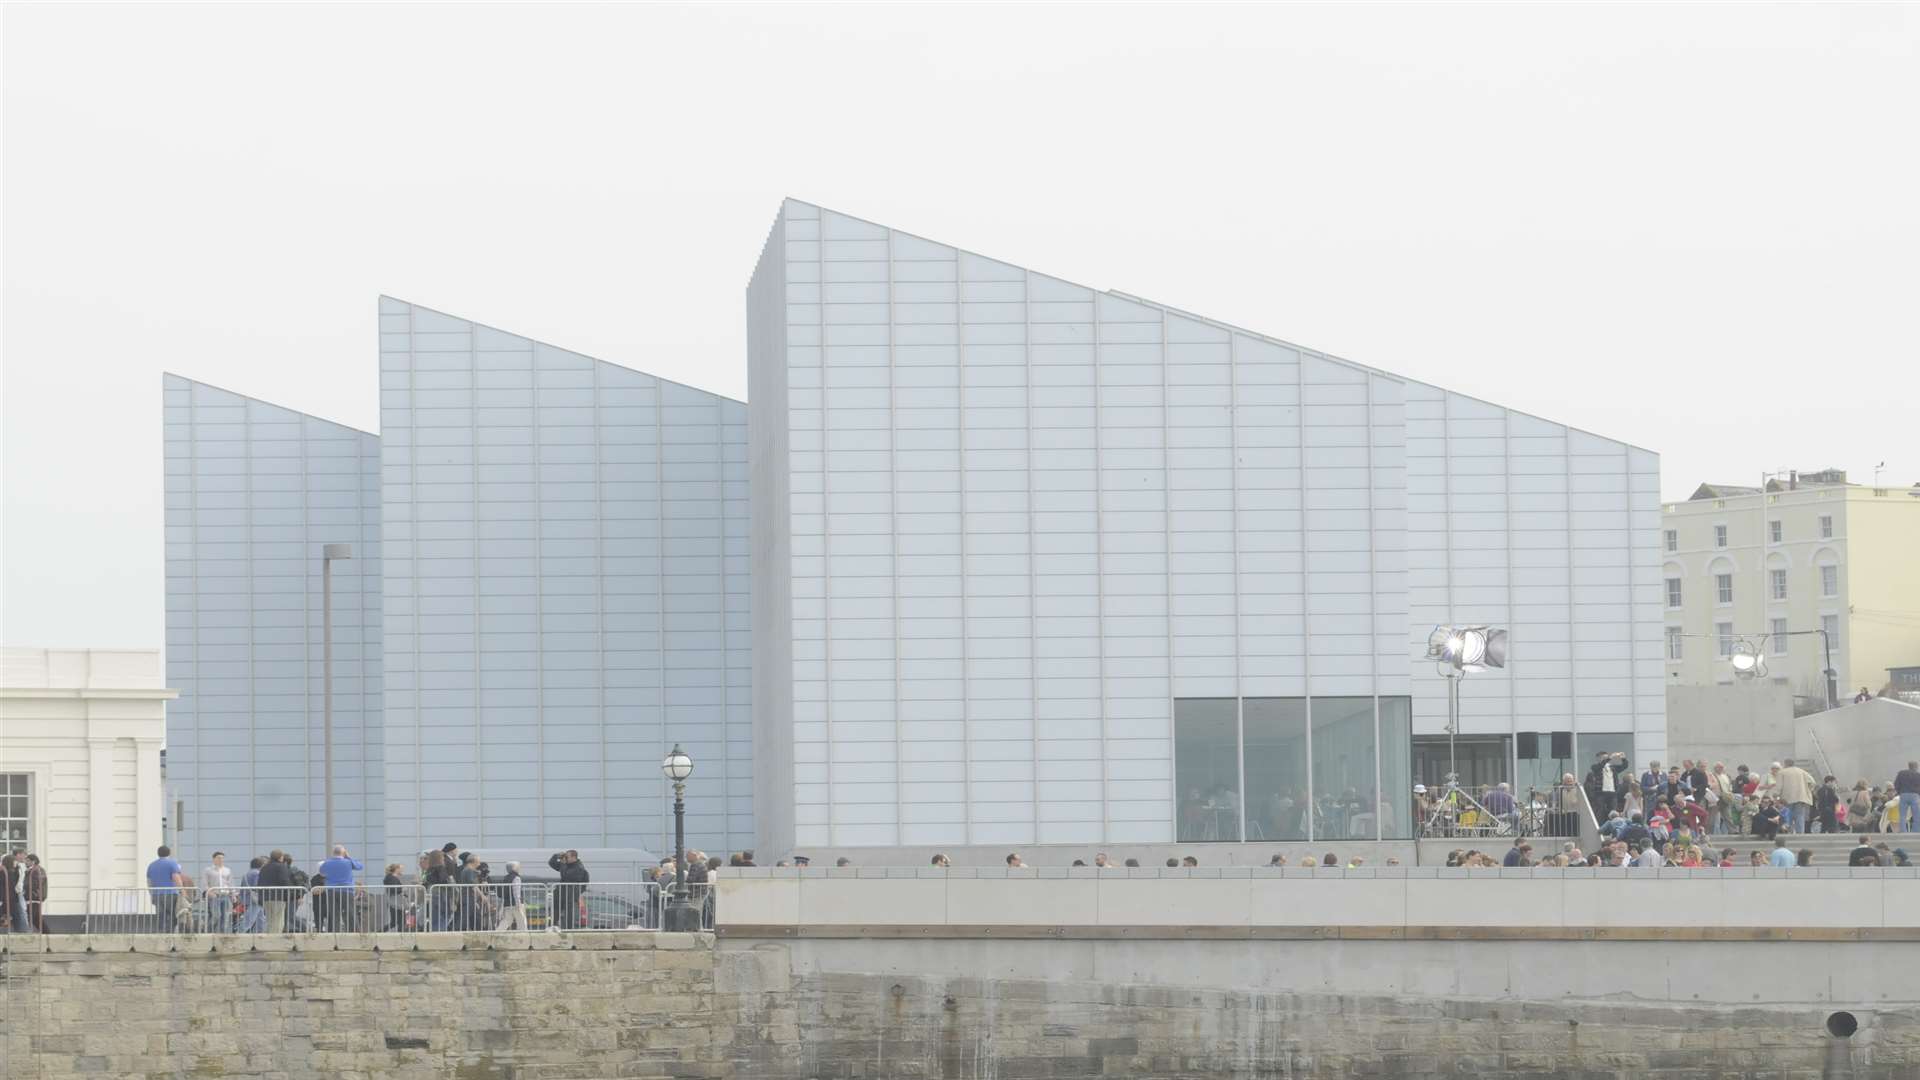 The Turner Contemporary in Margate